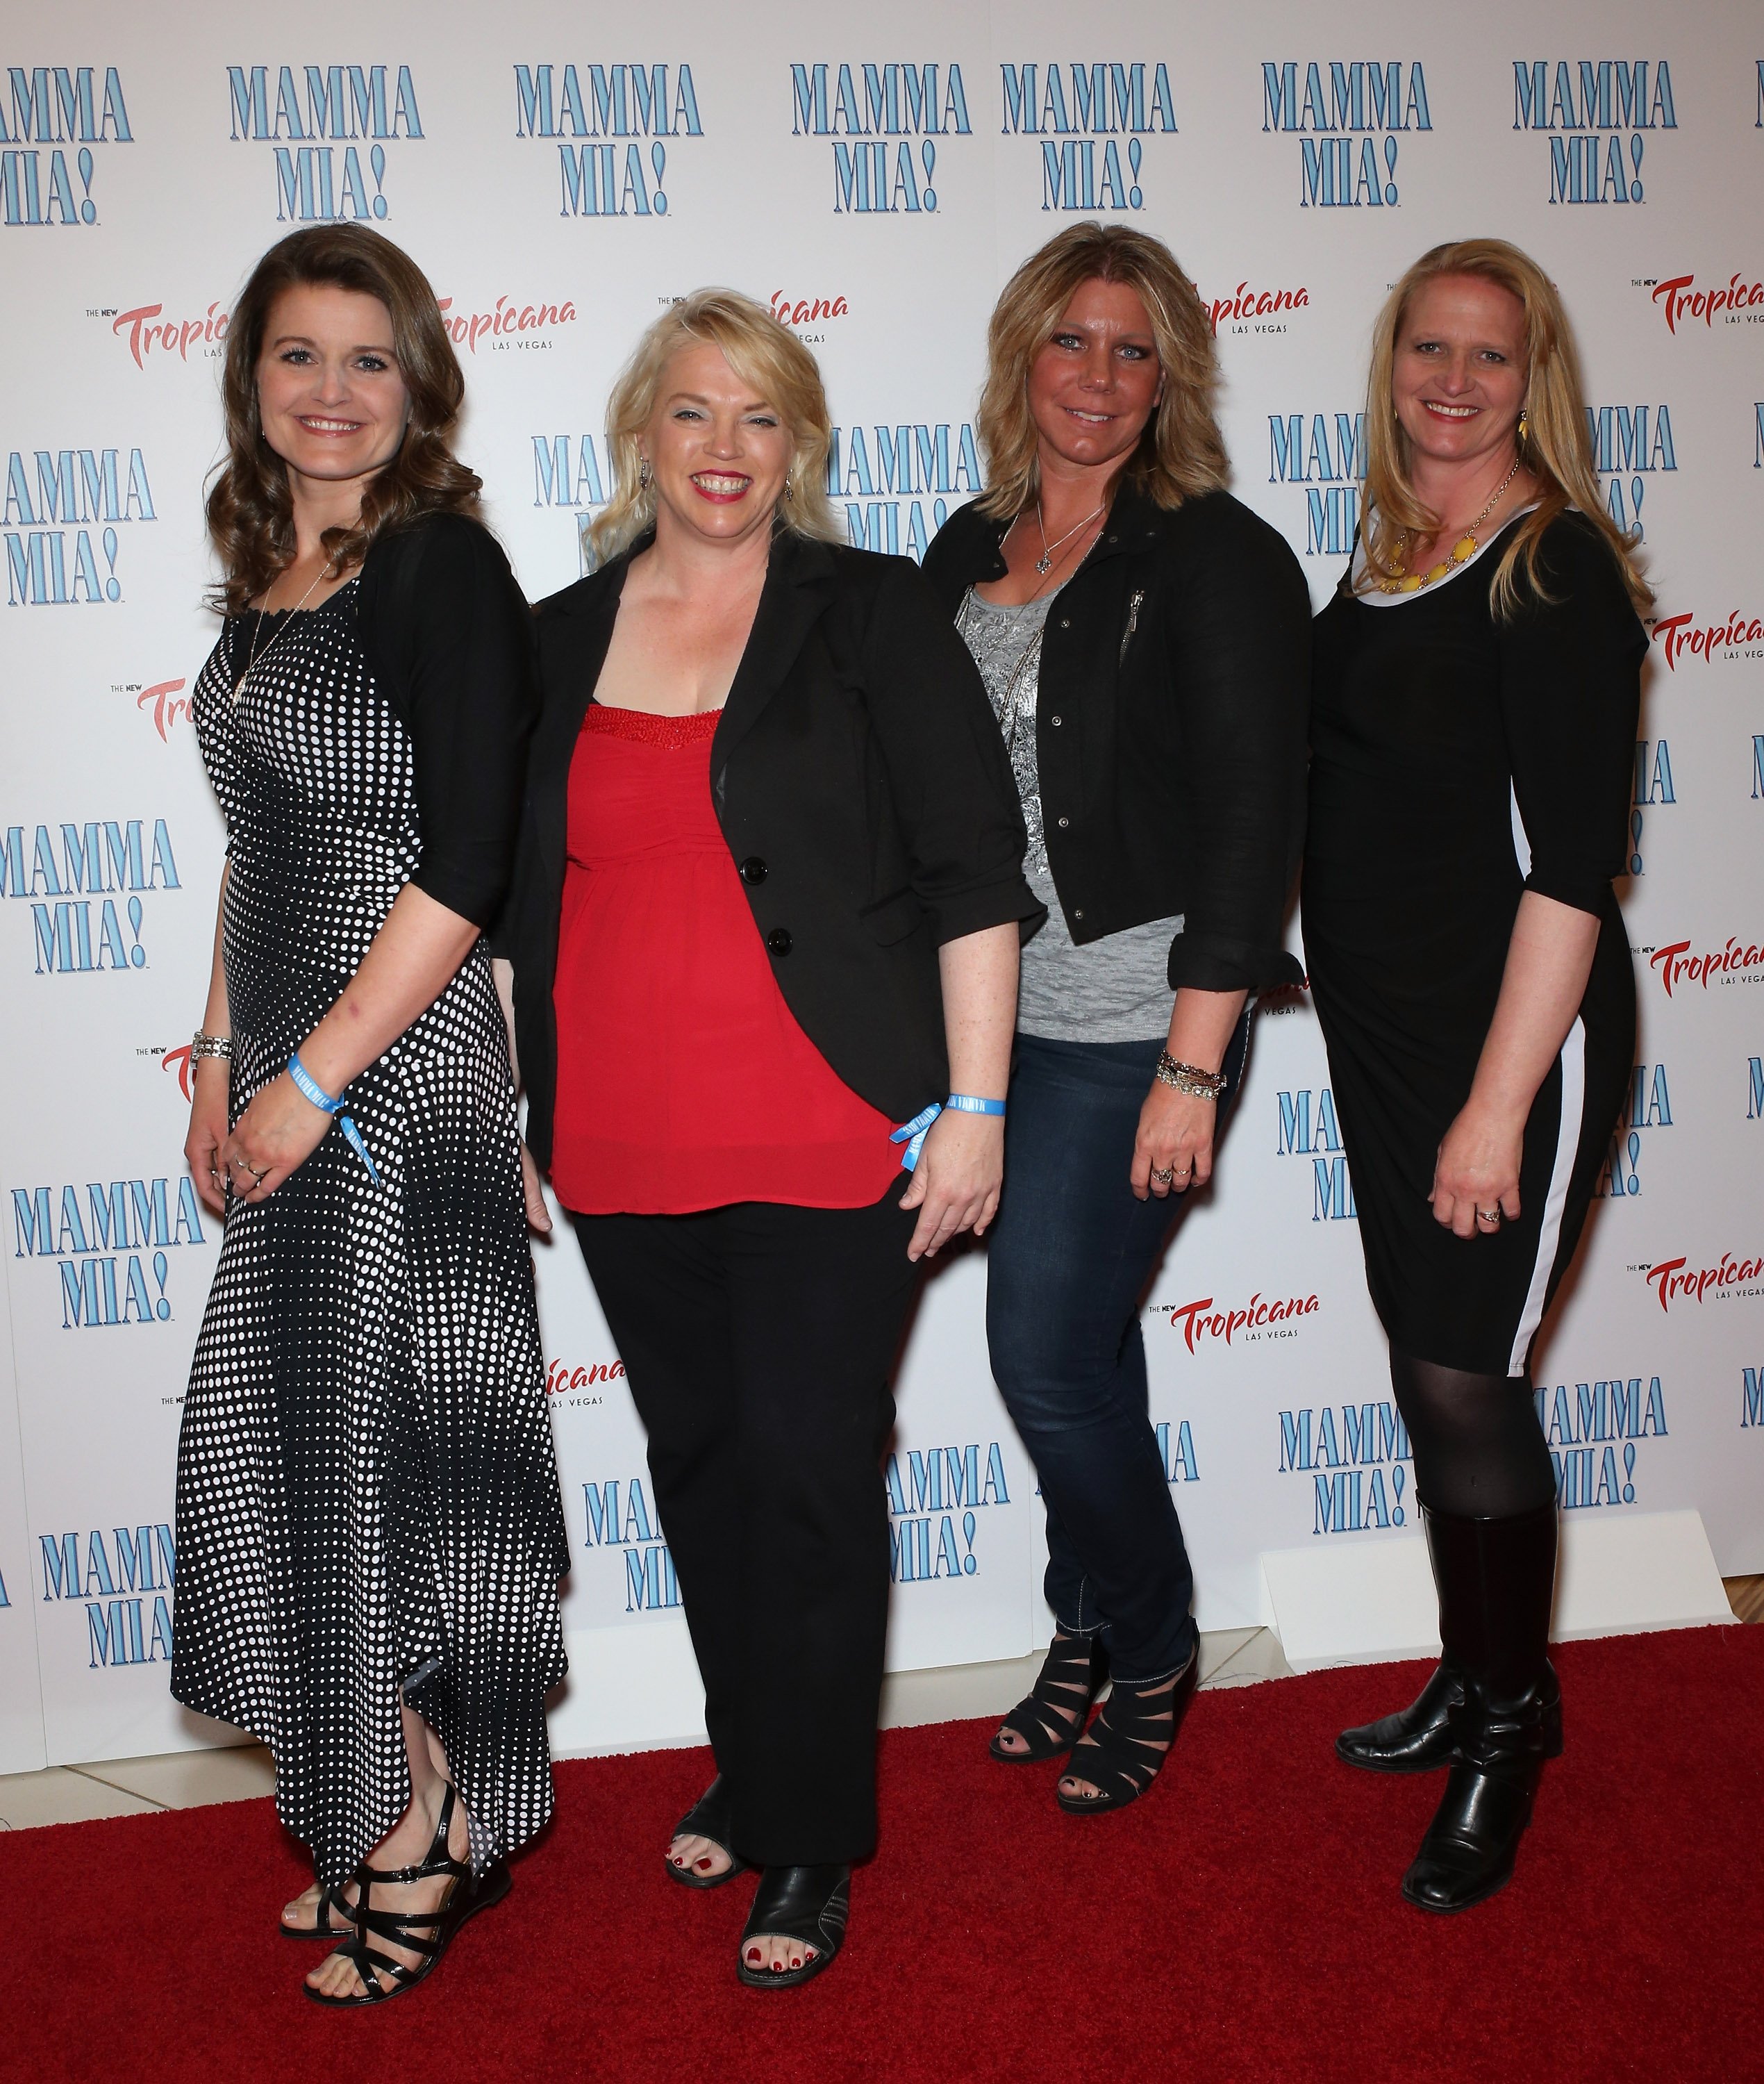 Robyn Brown, Janelle Brown Meri Brown and Christine Brown of 'Sister Wives' arrive at the grand opening of 'Mamma Mia!' at the New Tropicana Las Vegas in 2014